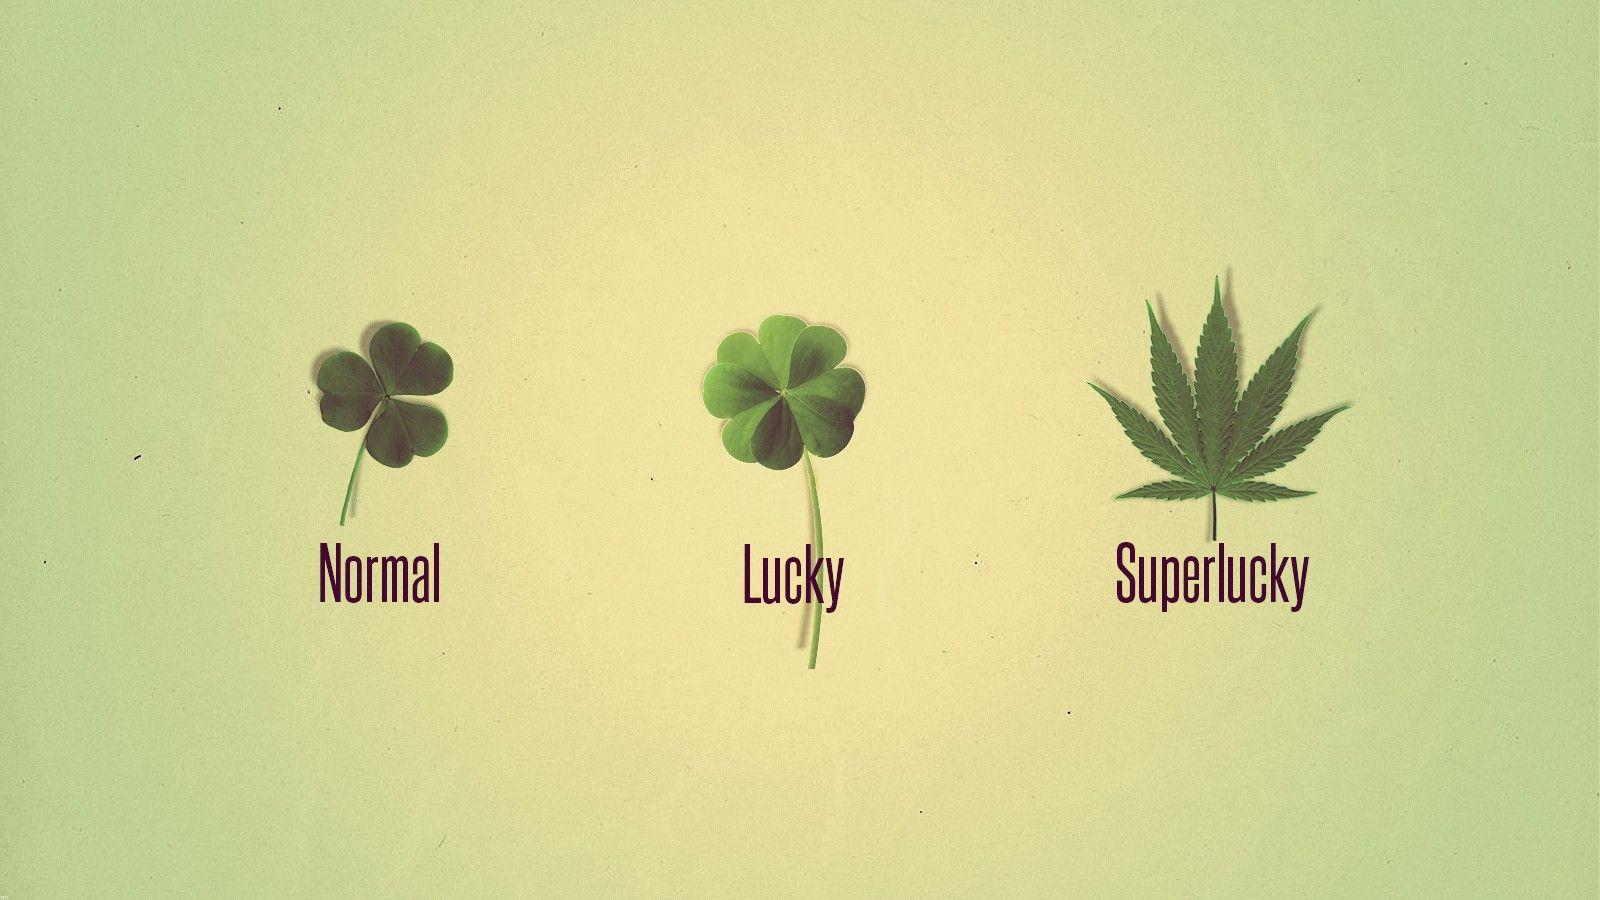 Lucky word typography style vector - Download Free Vectors, Clipart ...